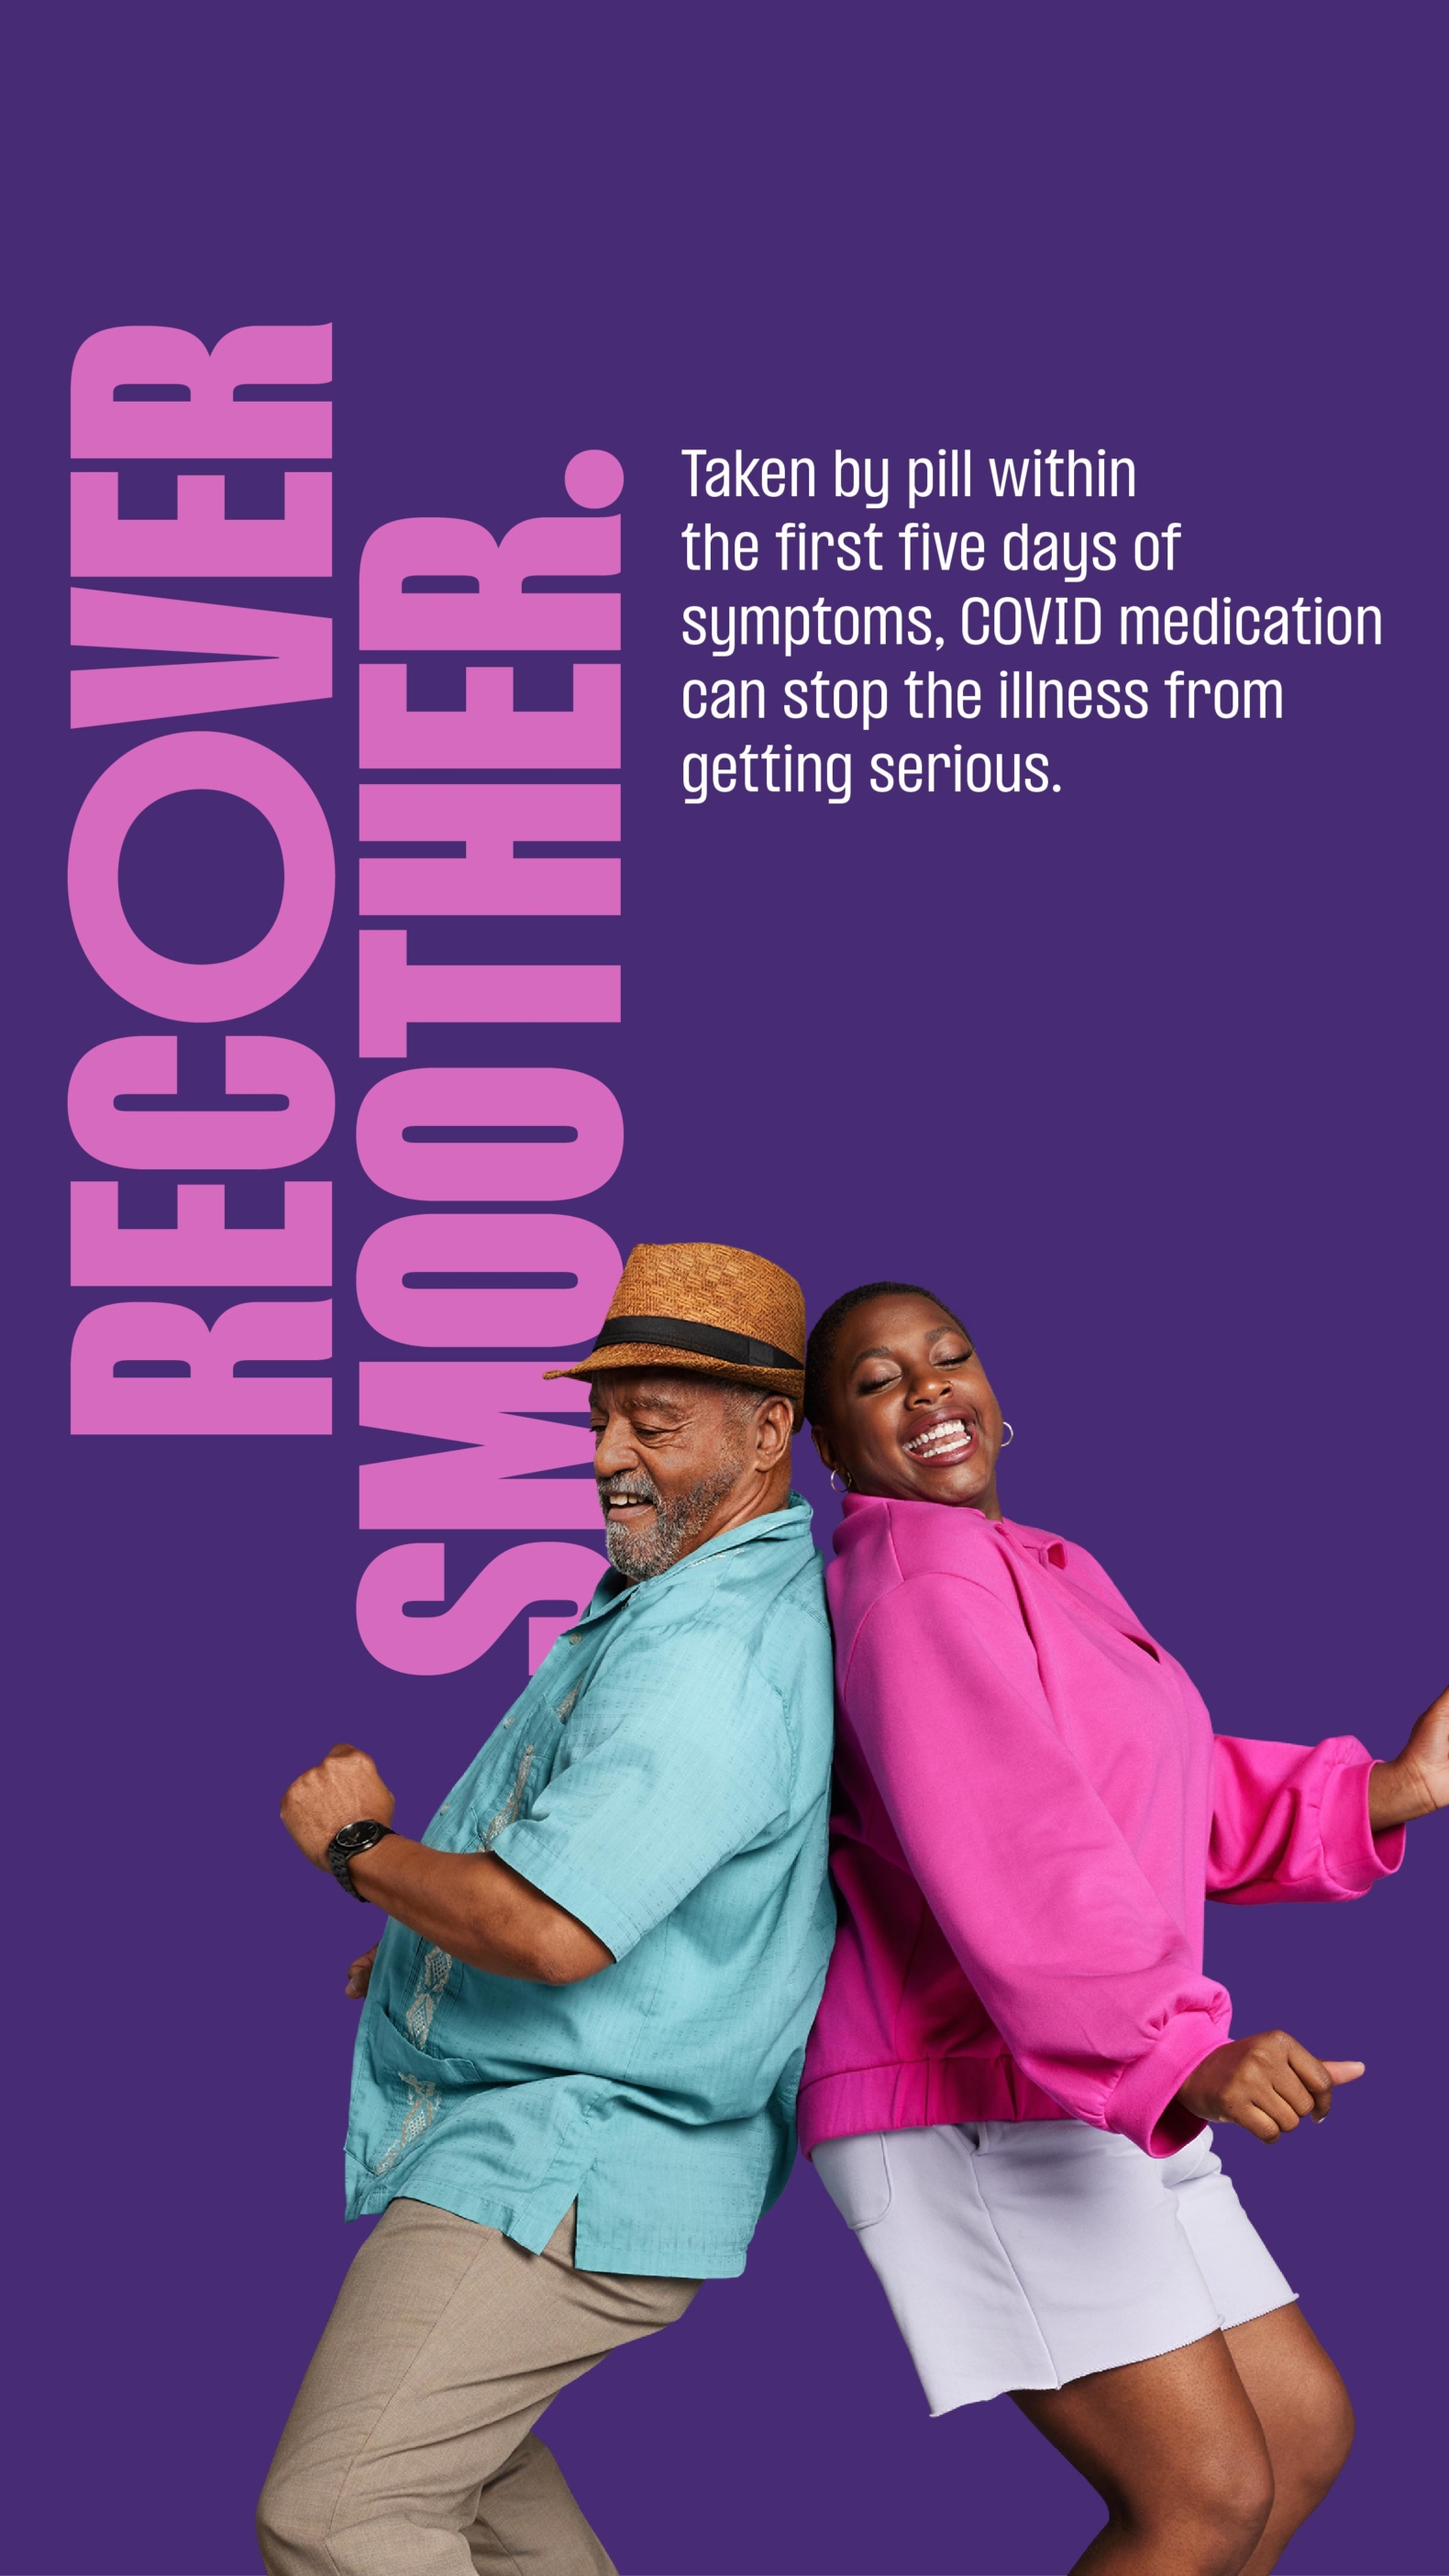 Vertical ad with dark purple background with large, bold pink type running vertically up the left side reading, “Recover Smoother.” Smaller white type runs horizontally at the top middle reading, “Taken by pill within the first five days of symptoms, COVID medication can stop the illness from getting serious.” At the bottom, middle two people are back to back mid dance groove. To the left is an older man wearing dark khakis, a bright teal bowling t-shirt and a brown panama hat. At his right is a woman wearing a bright pink jumper and white shorts. Both are smiling and looking down.